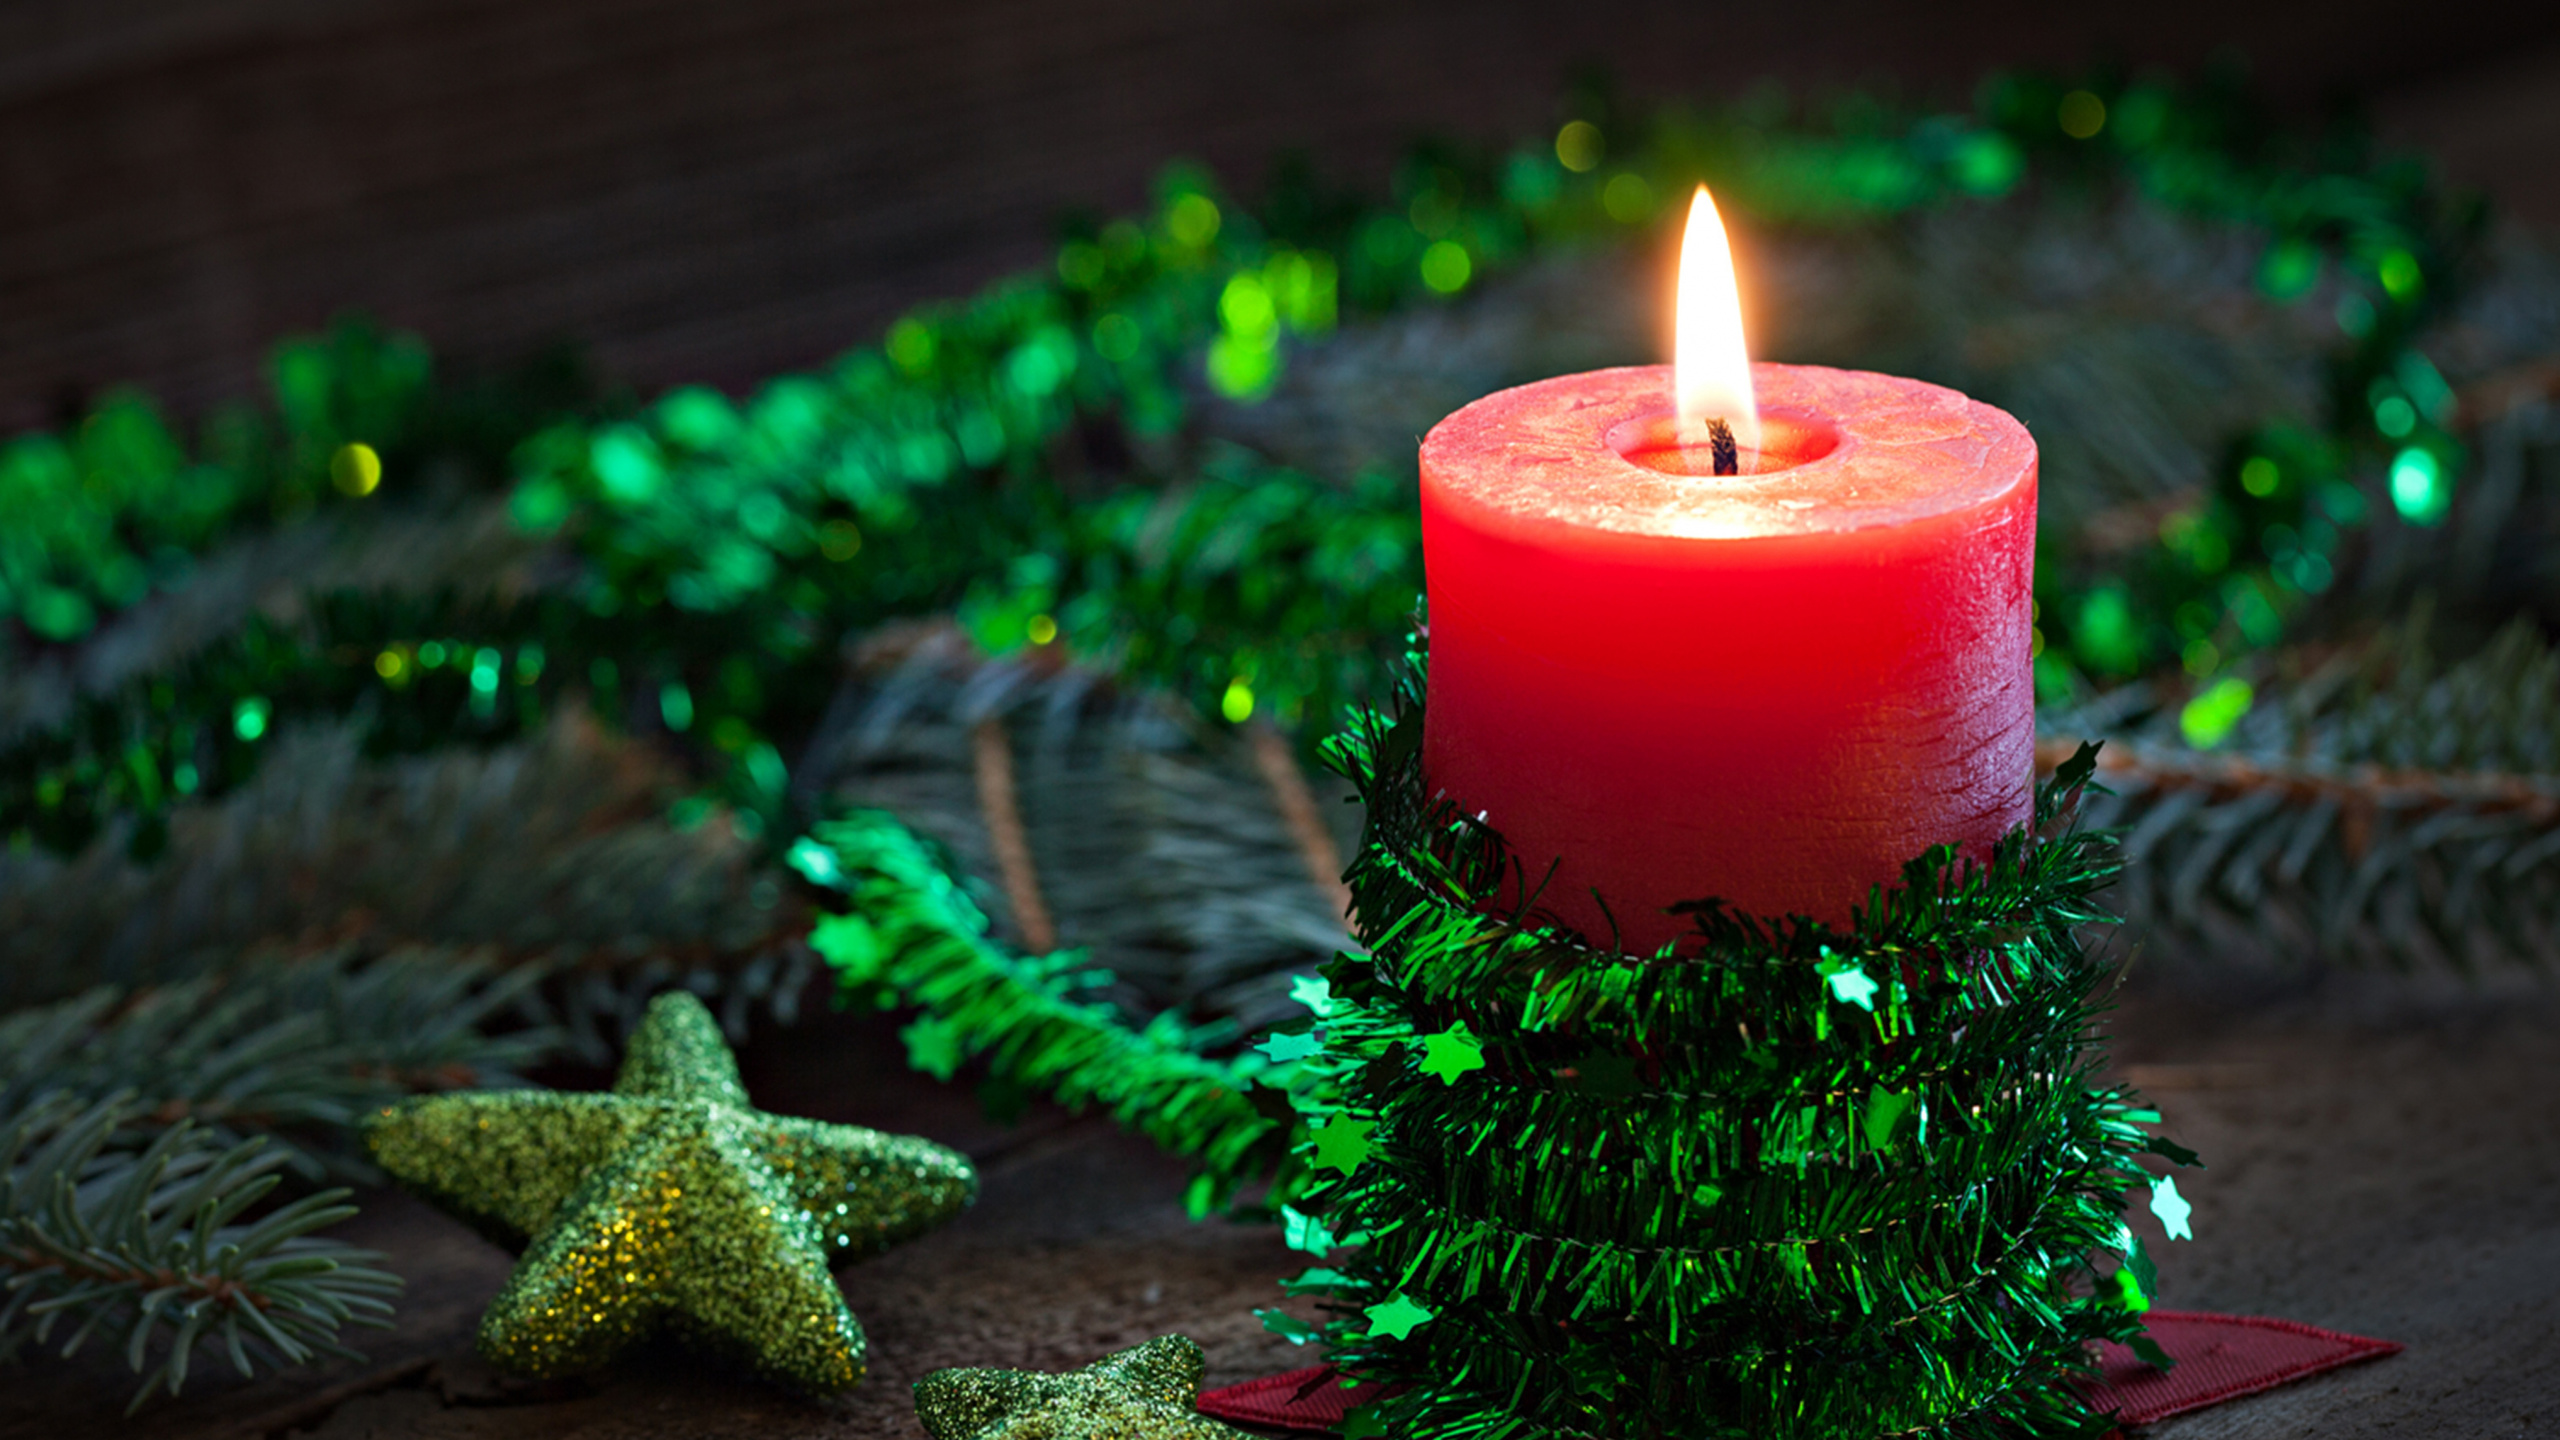 Candle, Green, Lighting, Christmas, Tree. Wallpaper in 2560x1440 Resolution